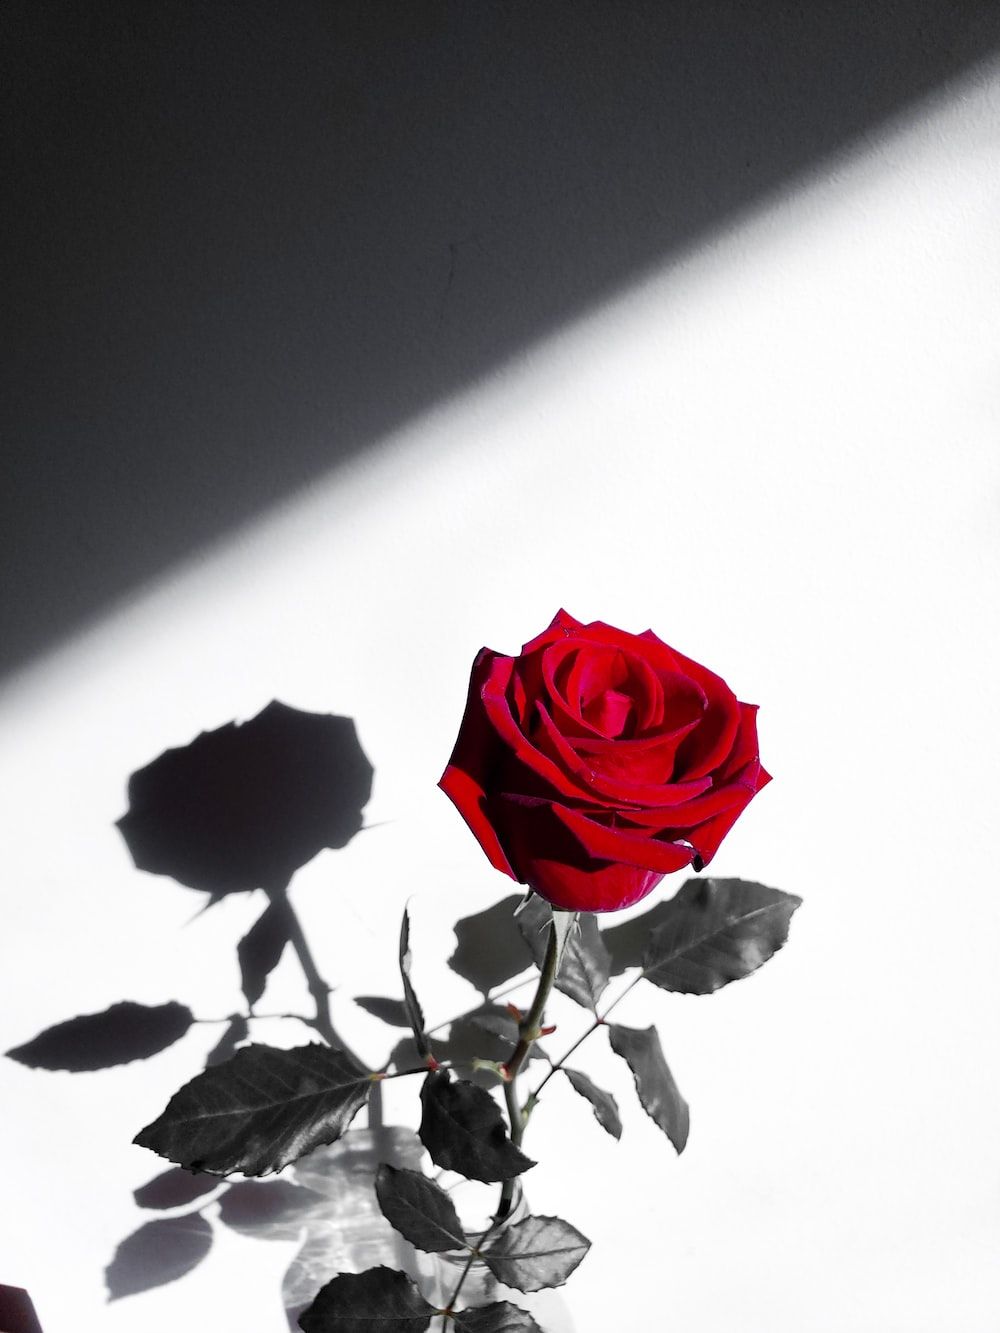 A red rose with a shadow on a white wall - Roses, black rose